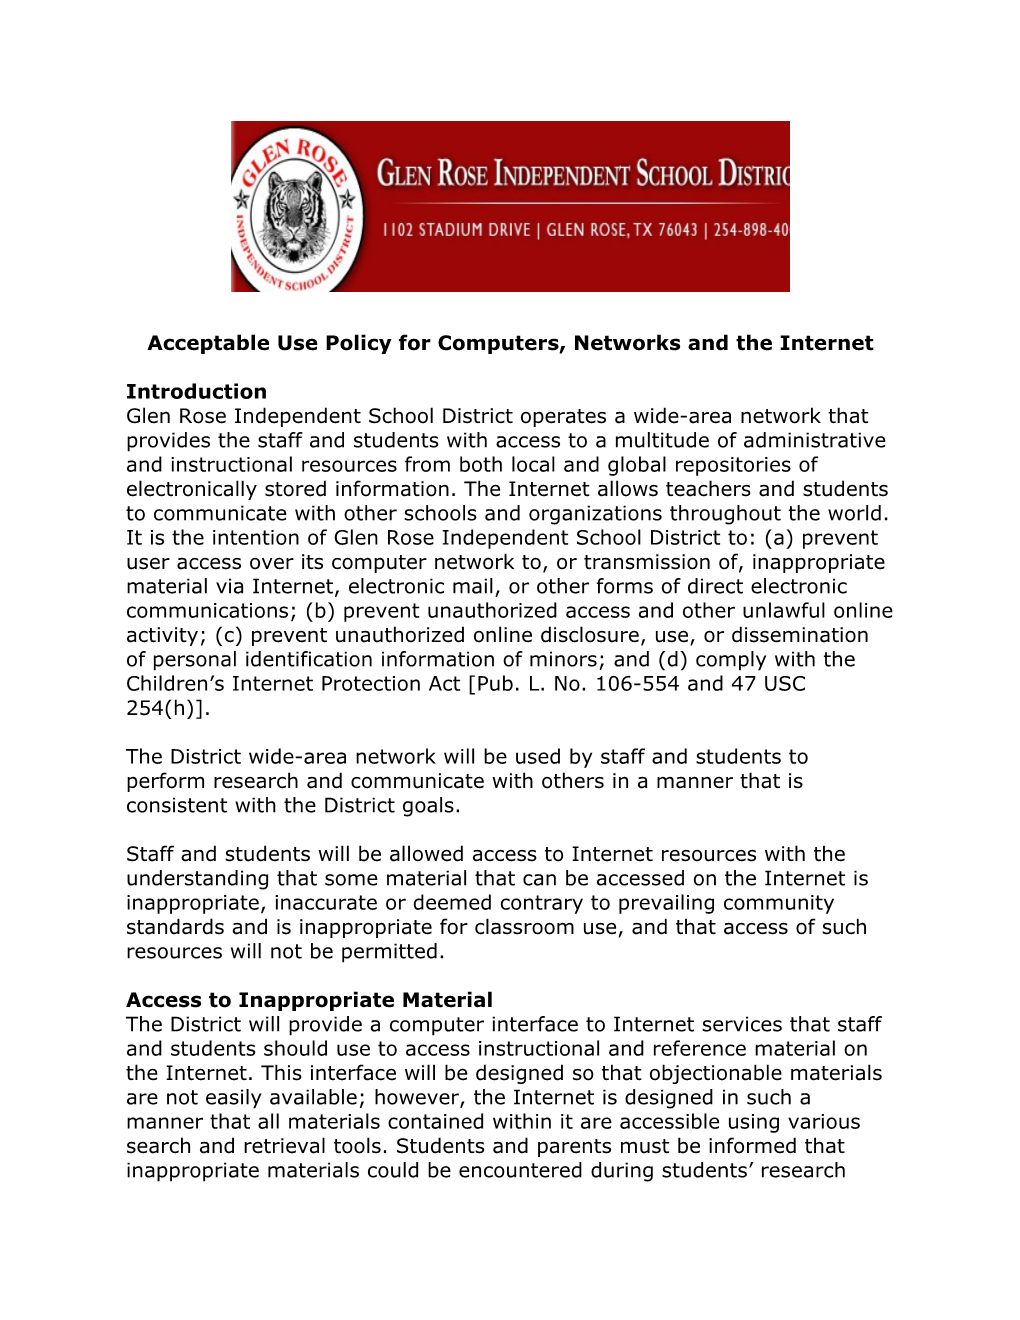 Acceptable Use Policy for Computers, Networks and the Internet